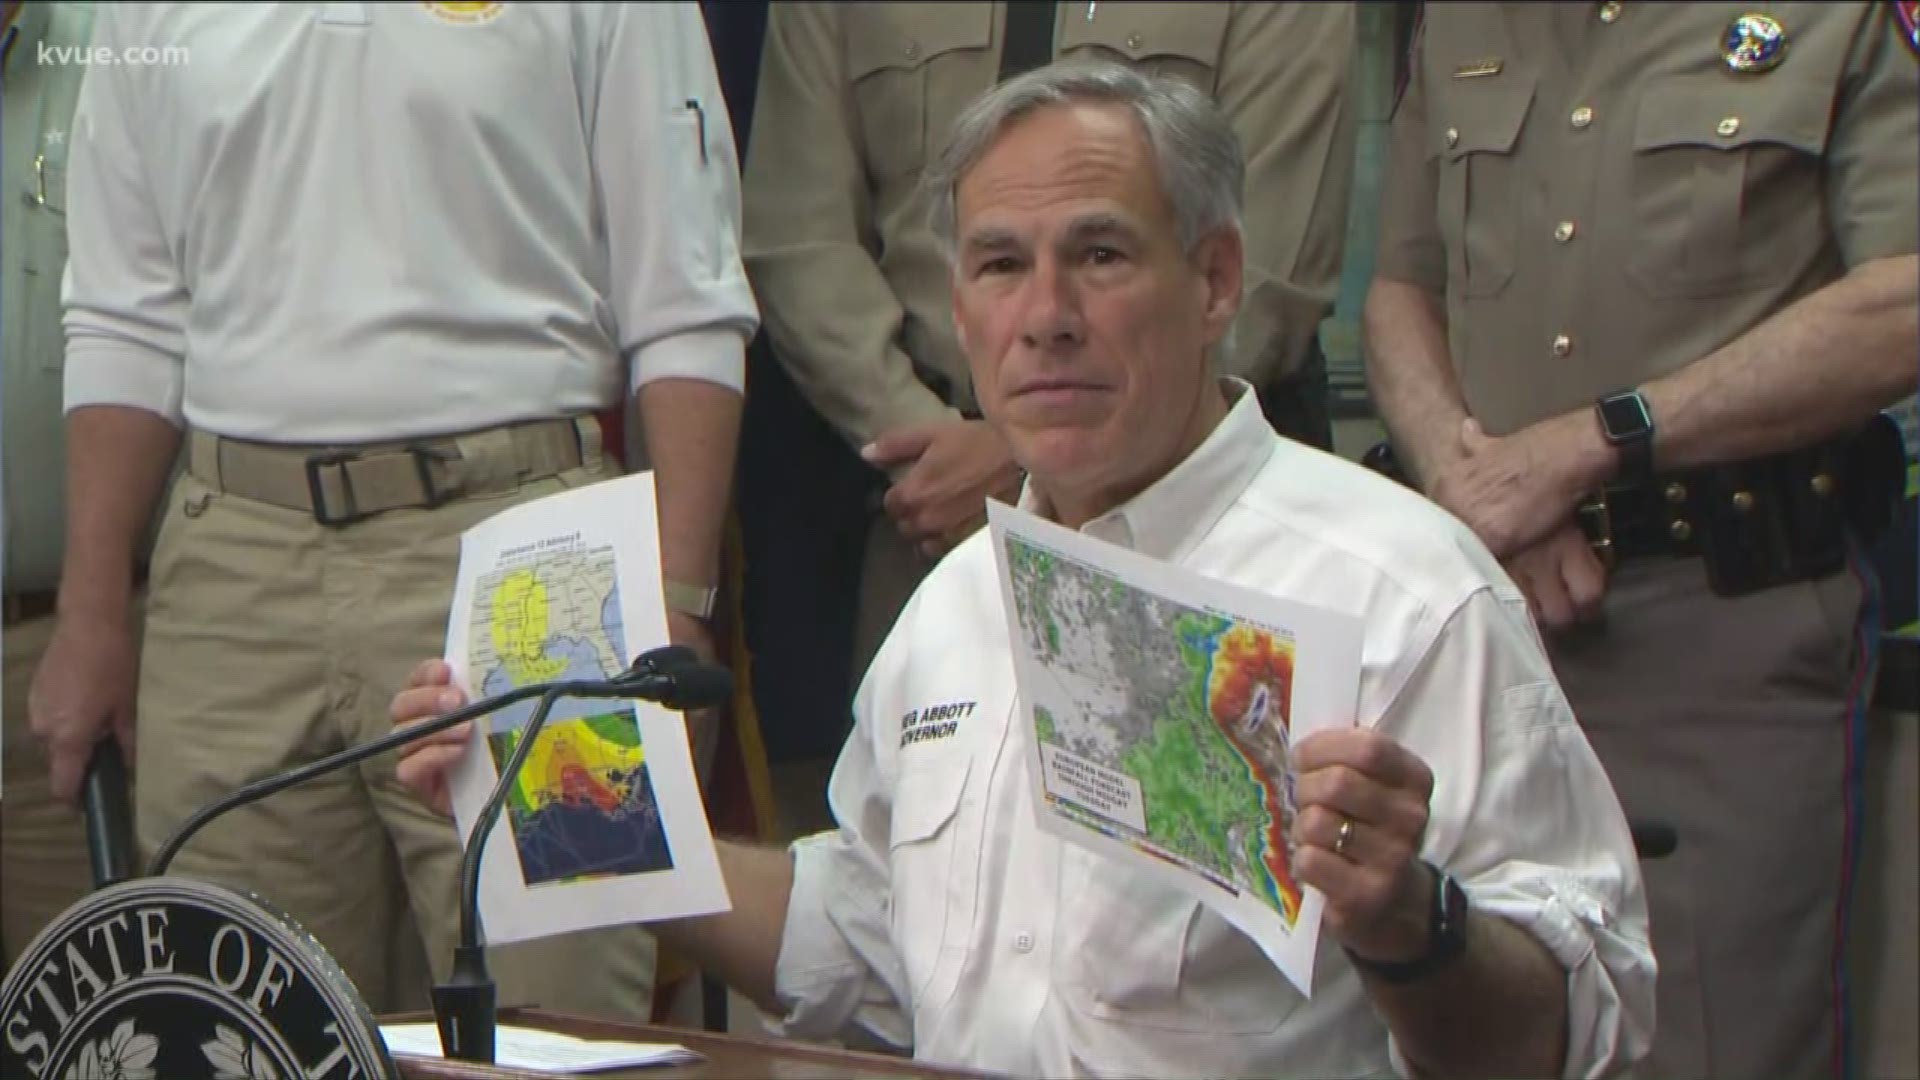 Governor Greg Abbott said state resources are in place in case a tropical storm does hit Texas.